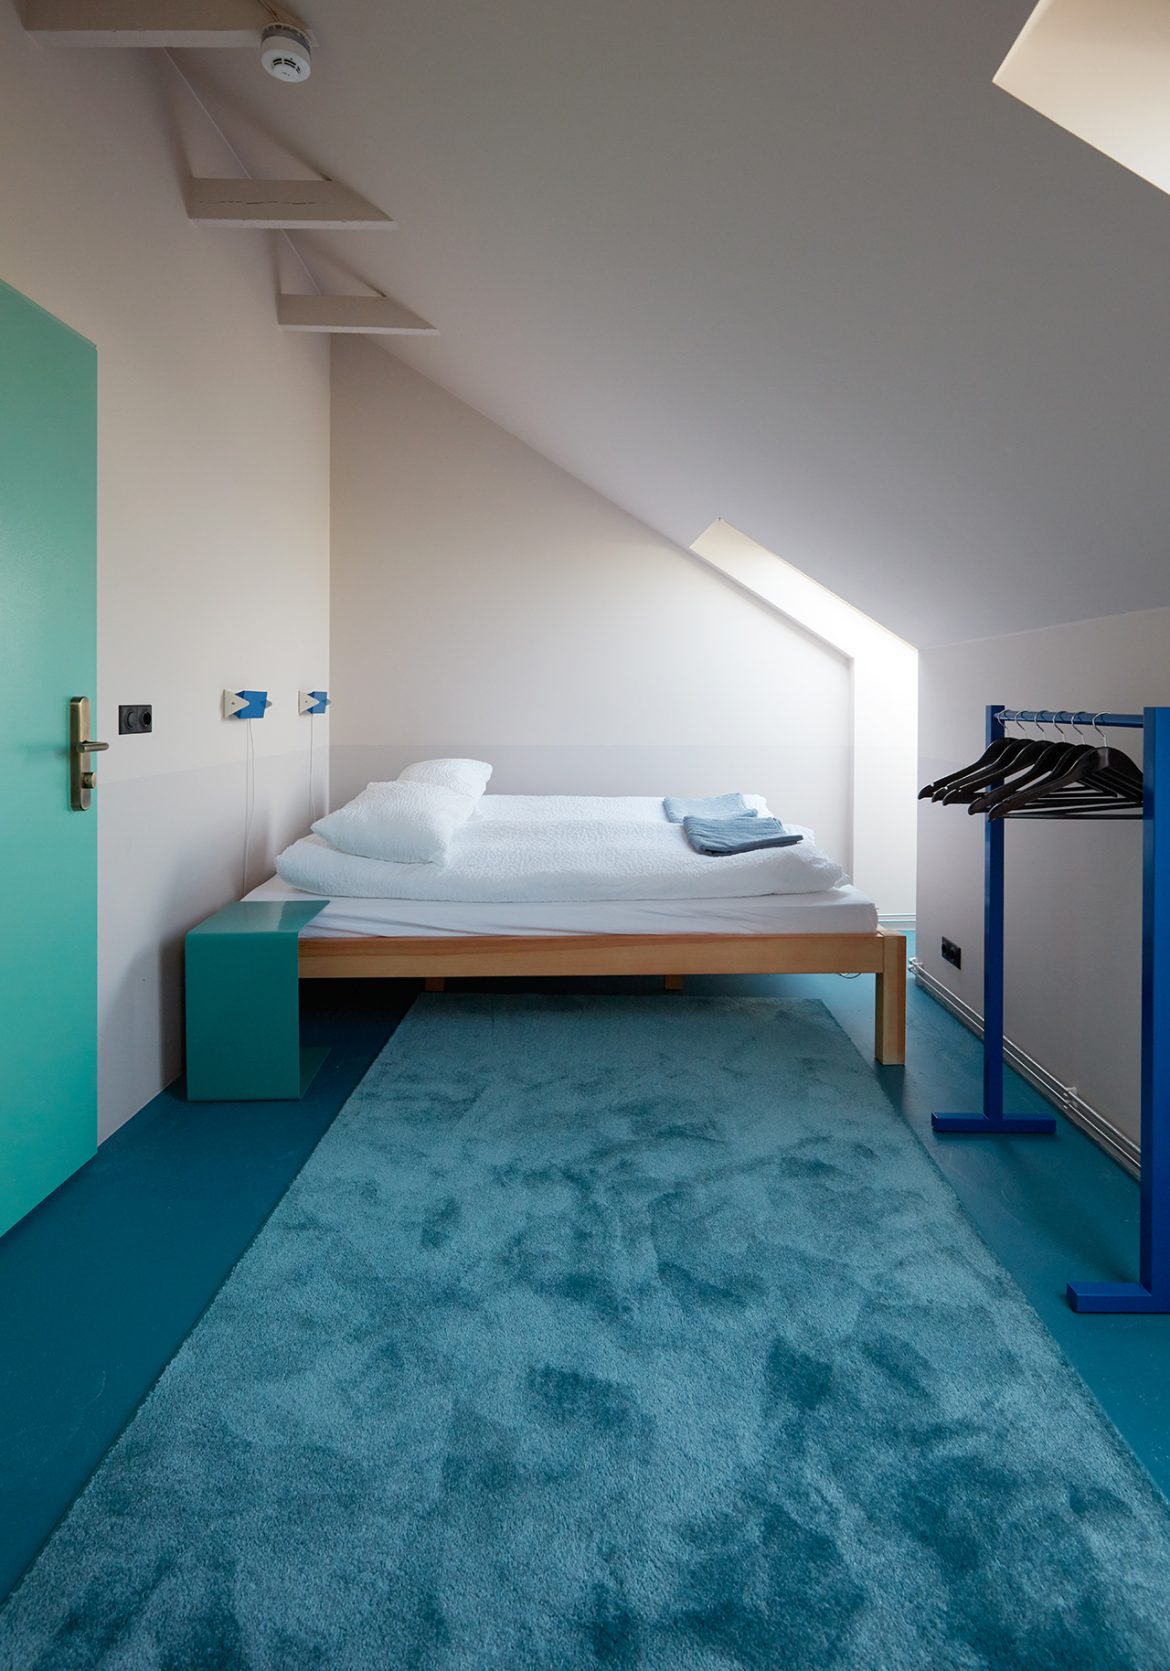 The ODDSSON HO(S)TEL: A LUXURY HOTEL WITH AN HOSTEL ATMOSPHERE